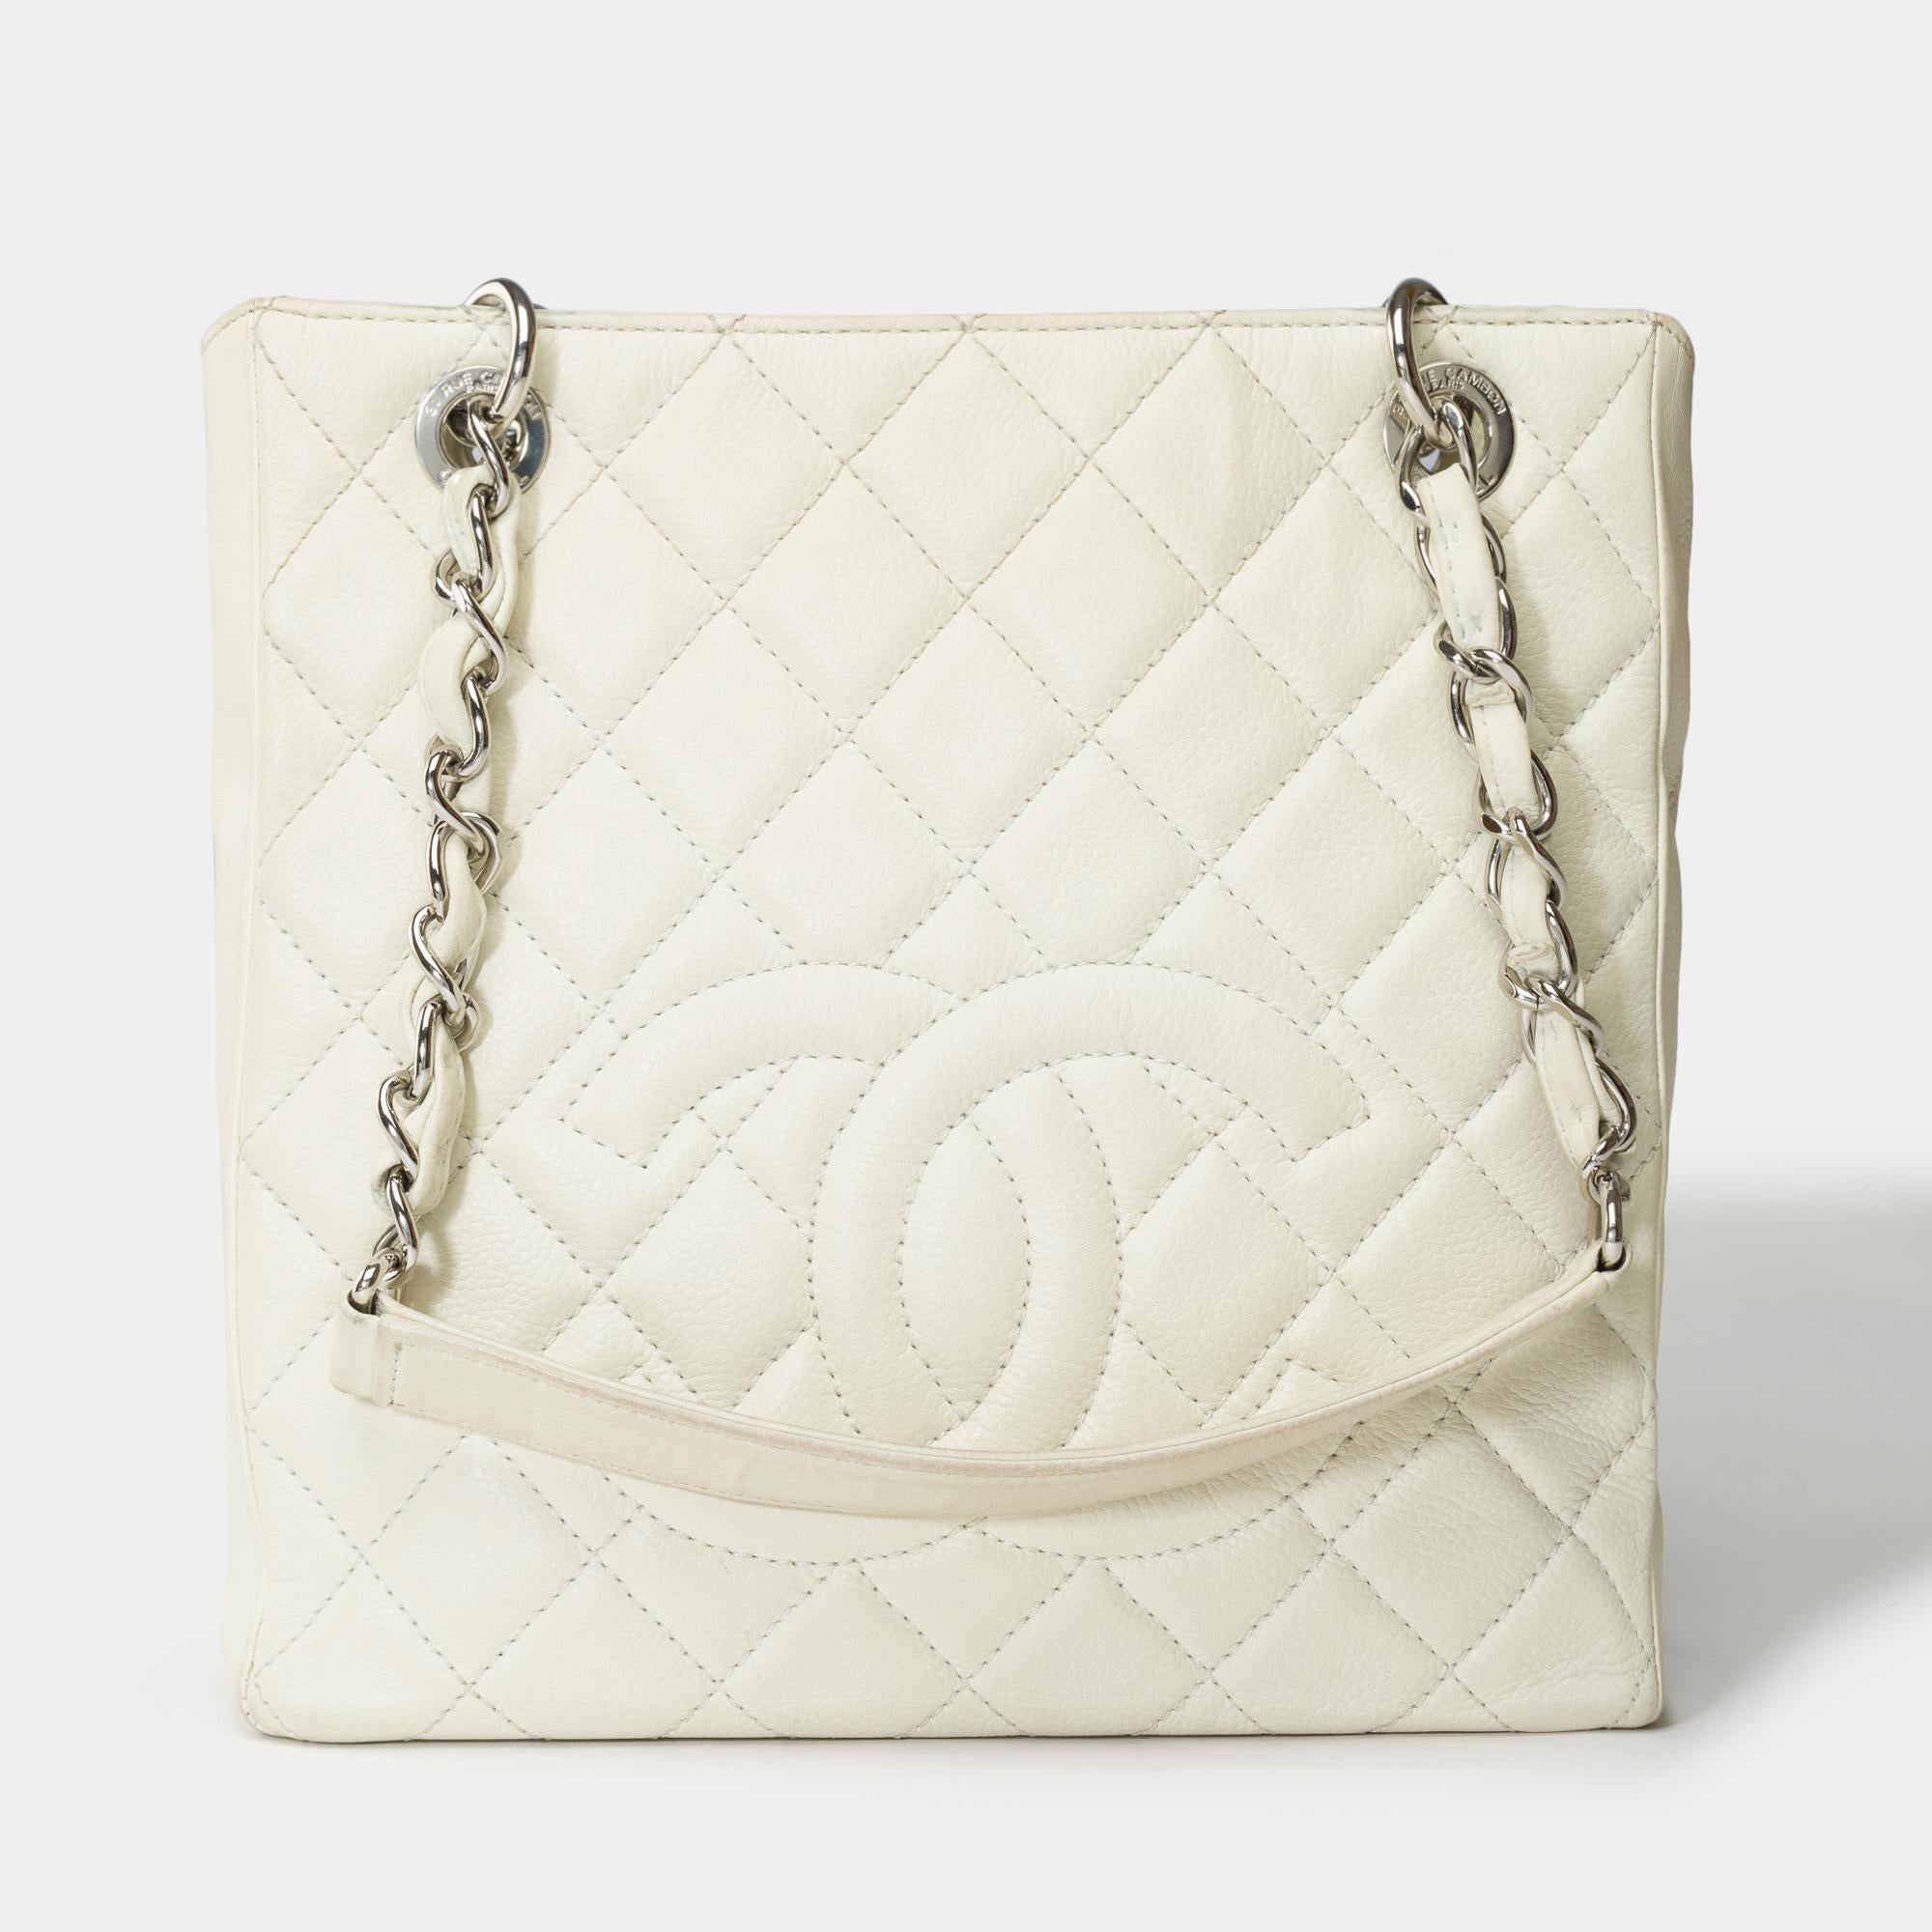 Chanel​​ ​​Shopping​​ ​​PST​​ ​​(Petit​​ ​​Shopping​​ ​​Tote)​​ ​​bag​​ ​​in​​ ​​in​ ​off-white​ ​caviar​ ​leather,​​ ​​silver​​ ​​metal​ ​trim,​​ ​​double​​ ​​handle​​ ​​in​​ ​​silver​​ ​​metal​​ ​​interwoven​​ ​​with​​ ​​off-white​ ​​leather​​